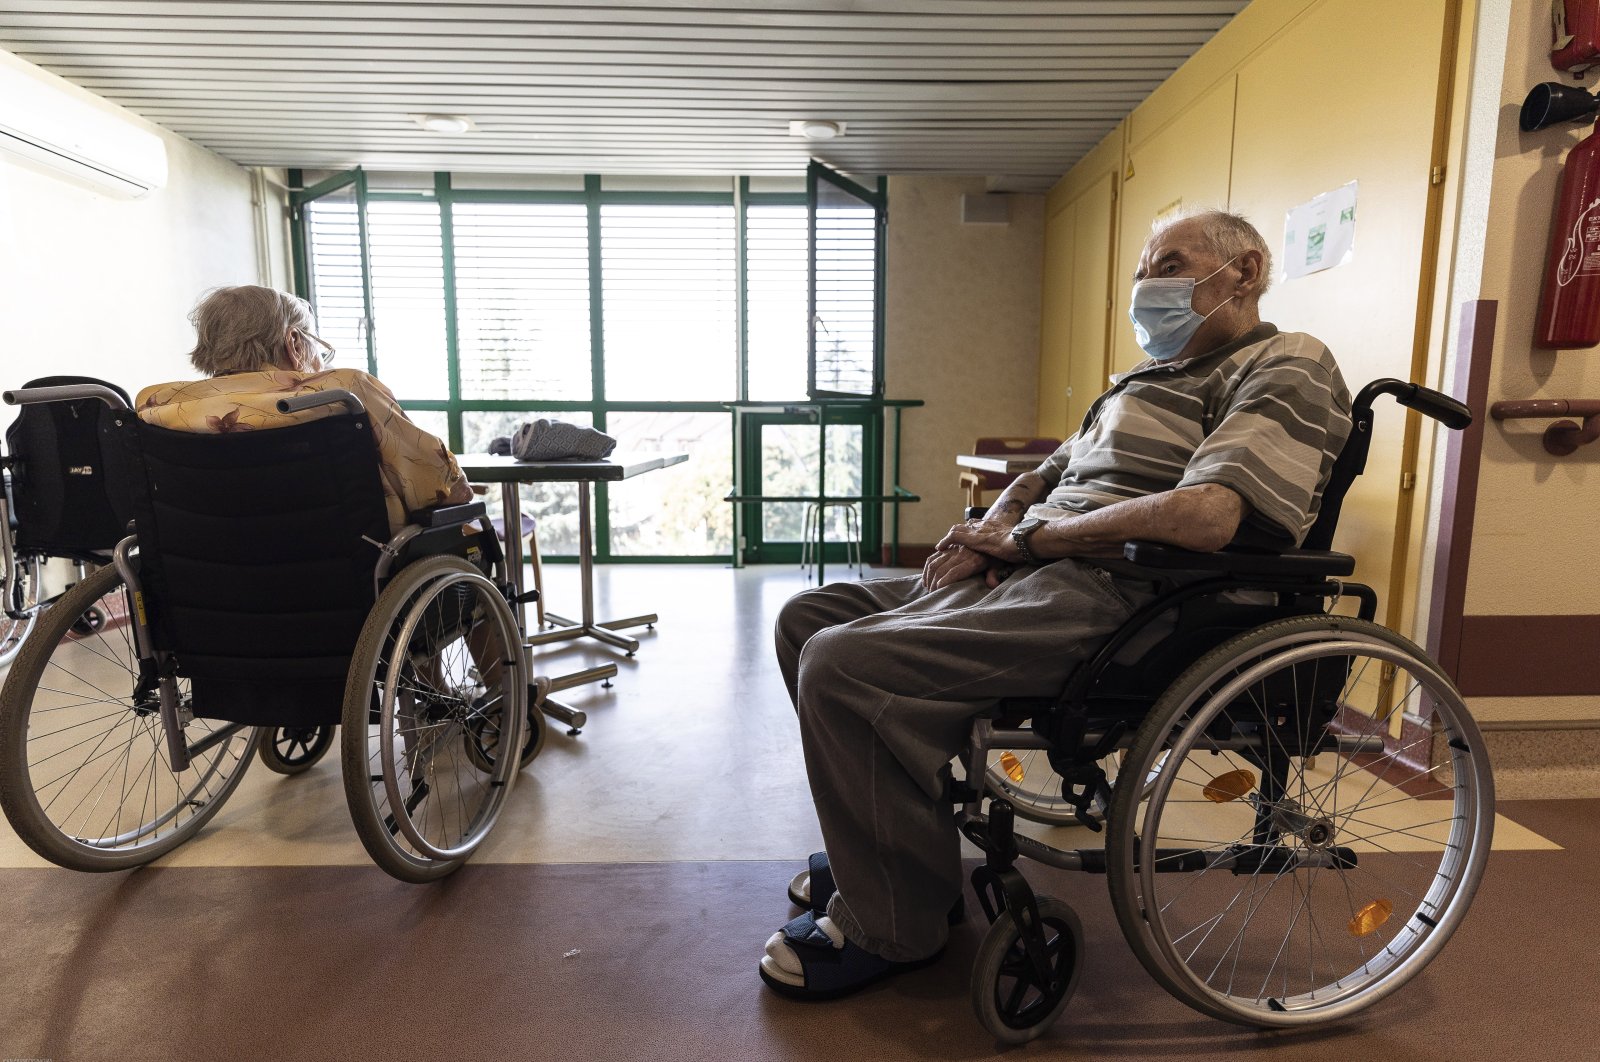 Elderly people in wheelchairs sit at a nursing home in Strasbourg, France, Aug. 19, 2020. (AP Photo)